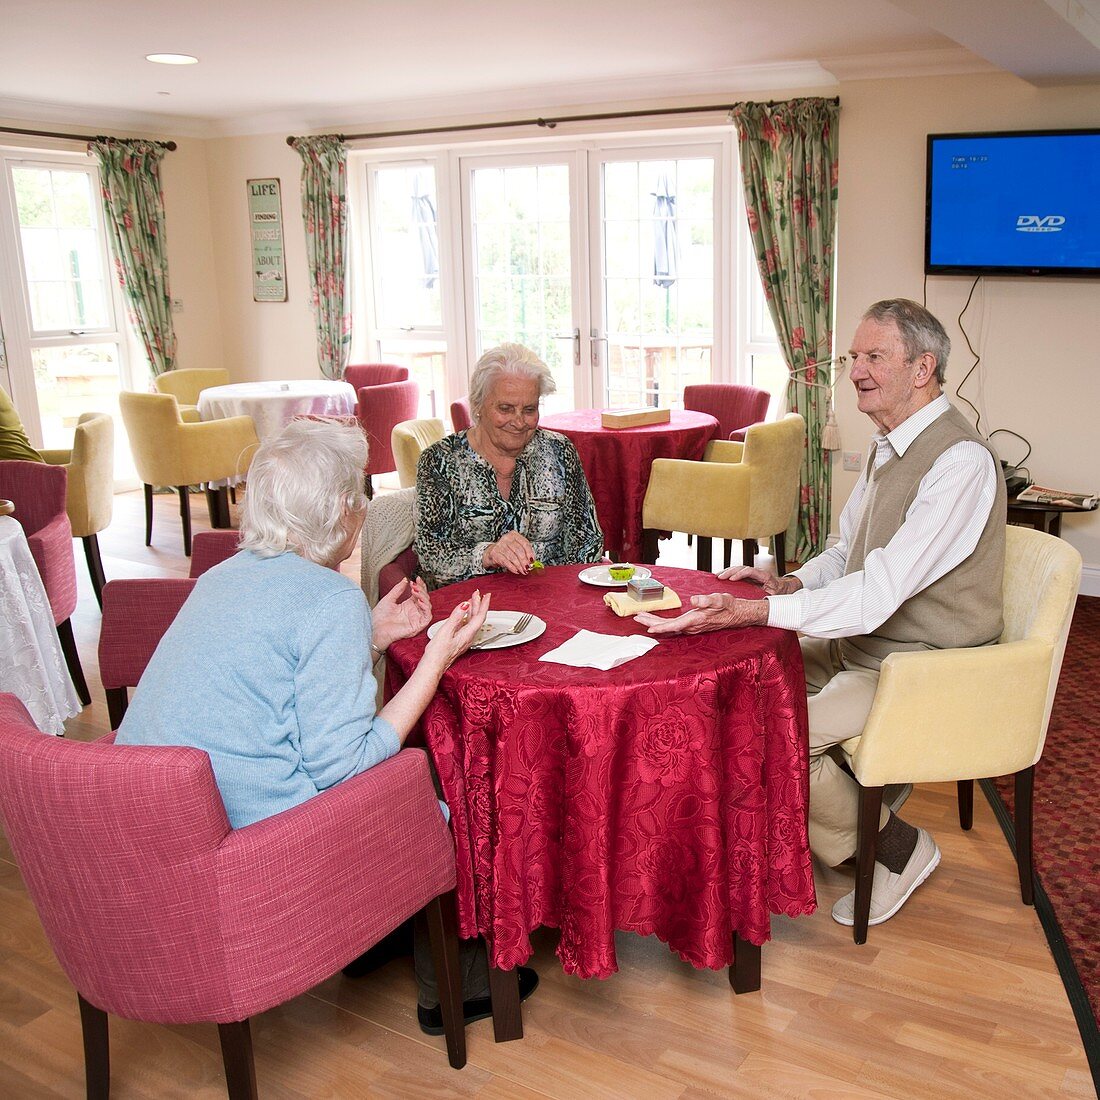 Elderly people at a care home